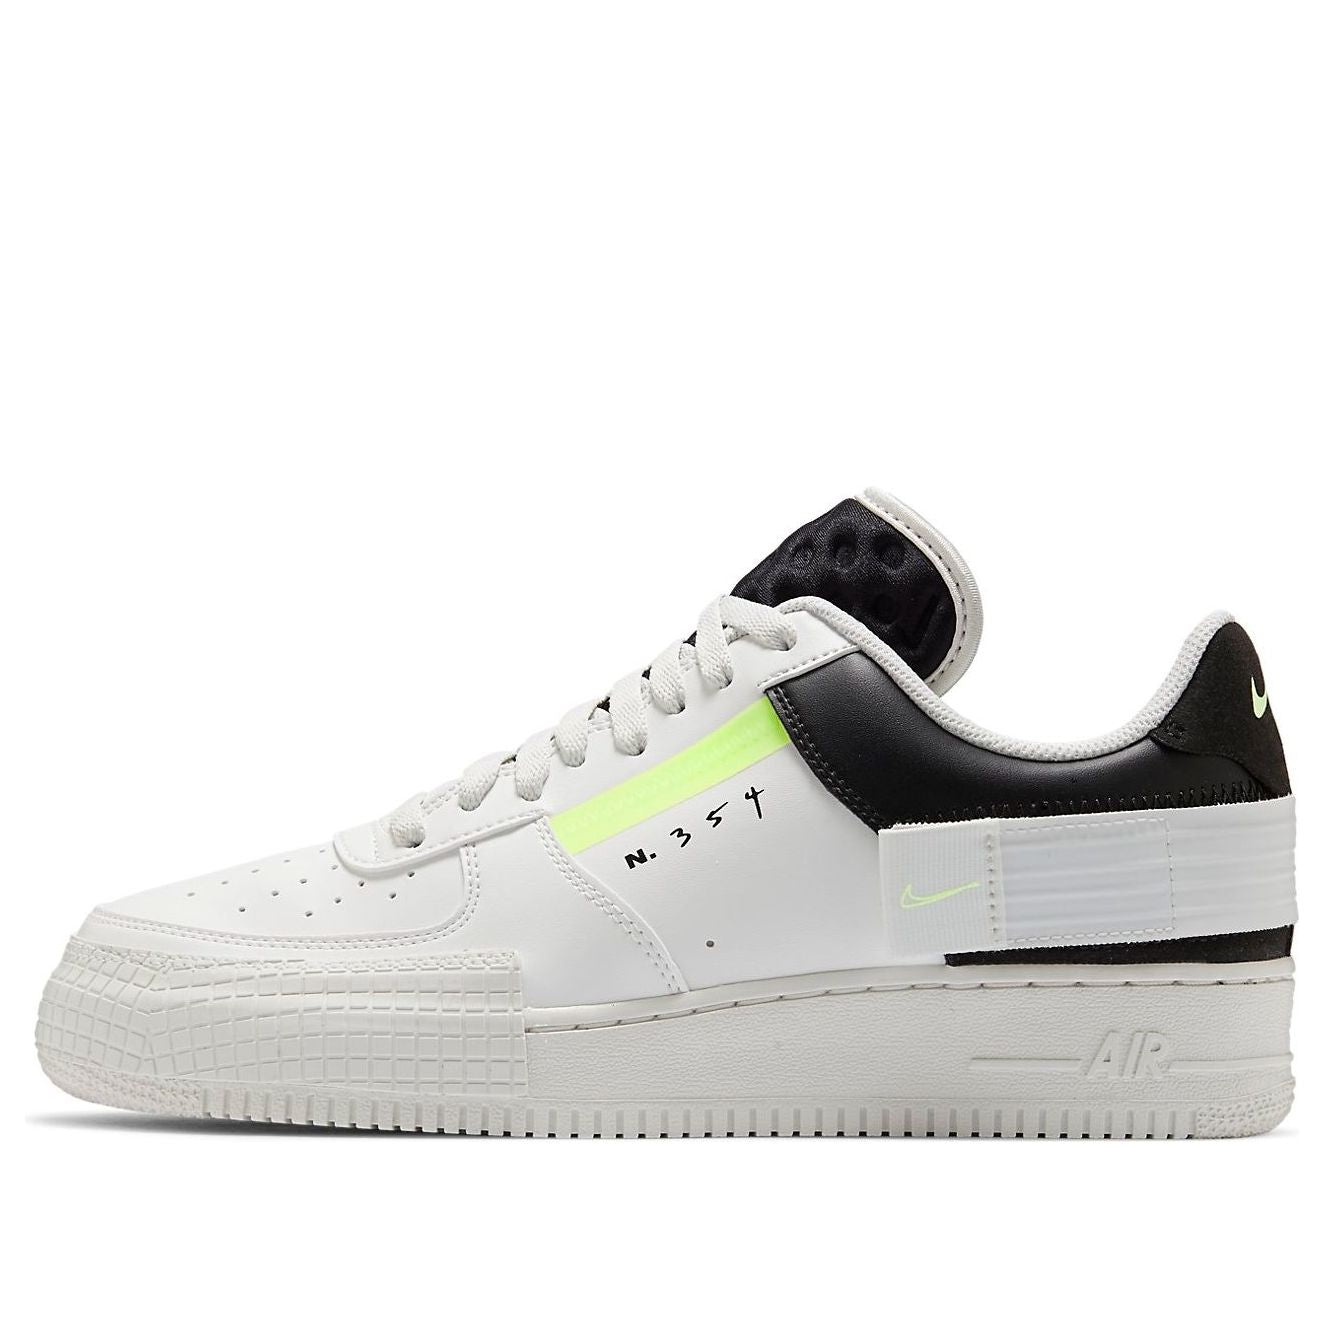 Nike Air Force 1 Type 'White Barely Volt' CK6923-100